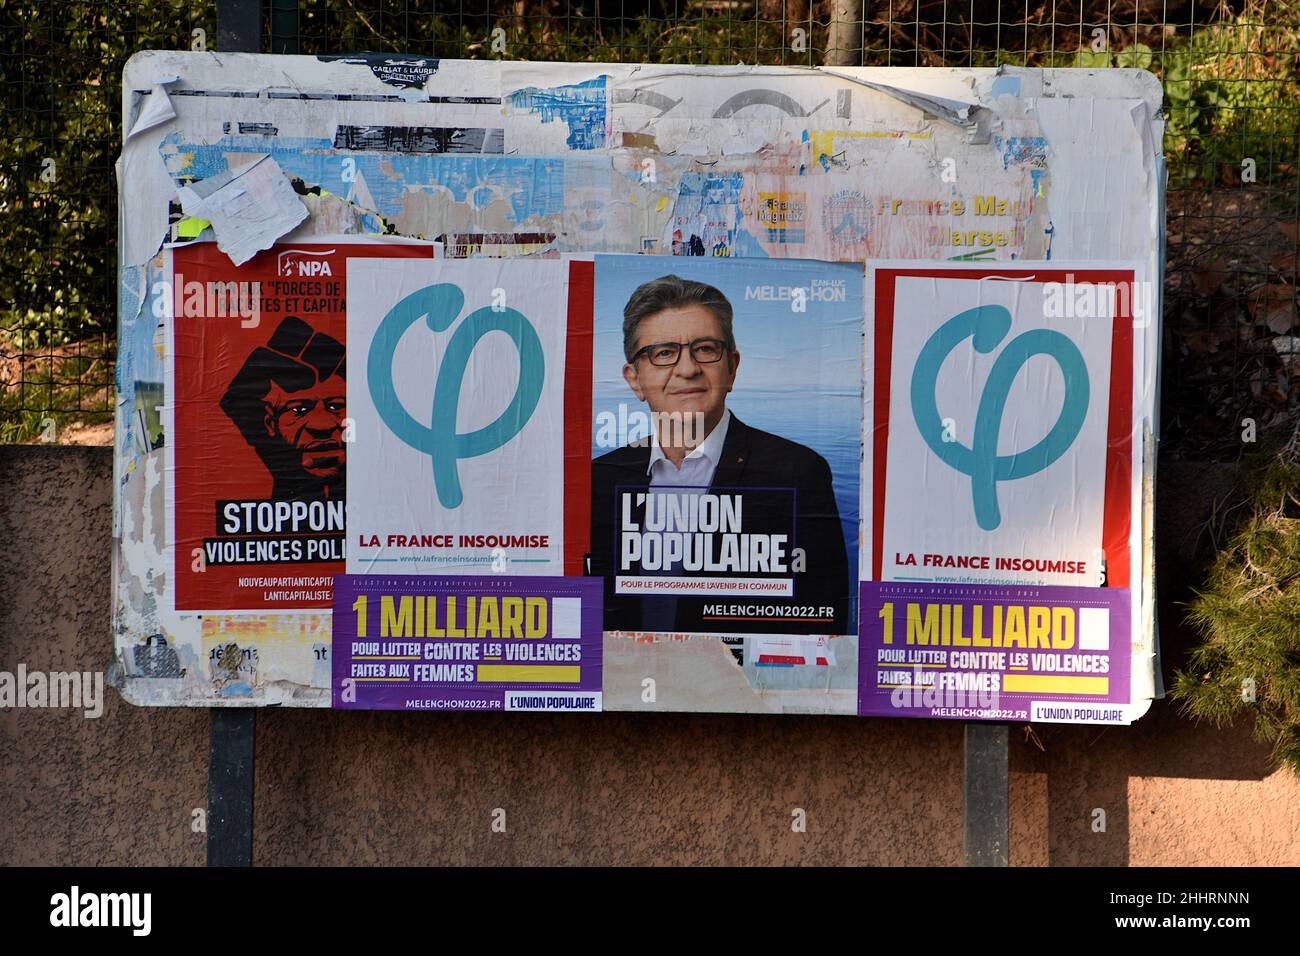 Marseille, France. 25th Jan, 2022. A poster of Jean-Luc Mélenchon is seen on display.Posters campaign of Nathalie Arthaud, Fabien Roussel, Philippe Poutou and Jean-Luc Mélenchon, candidates for the French presidential elections of 2022. Credit: SOPA Images Limited/Alamy Live News Stock Photo